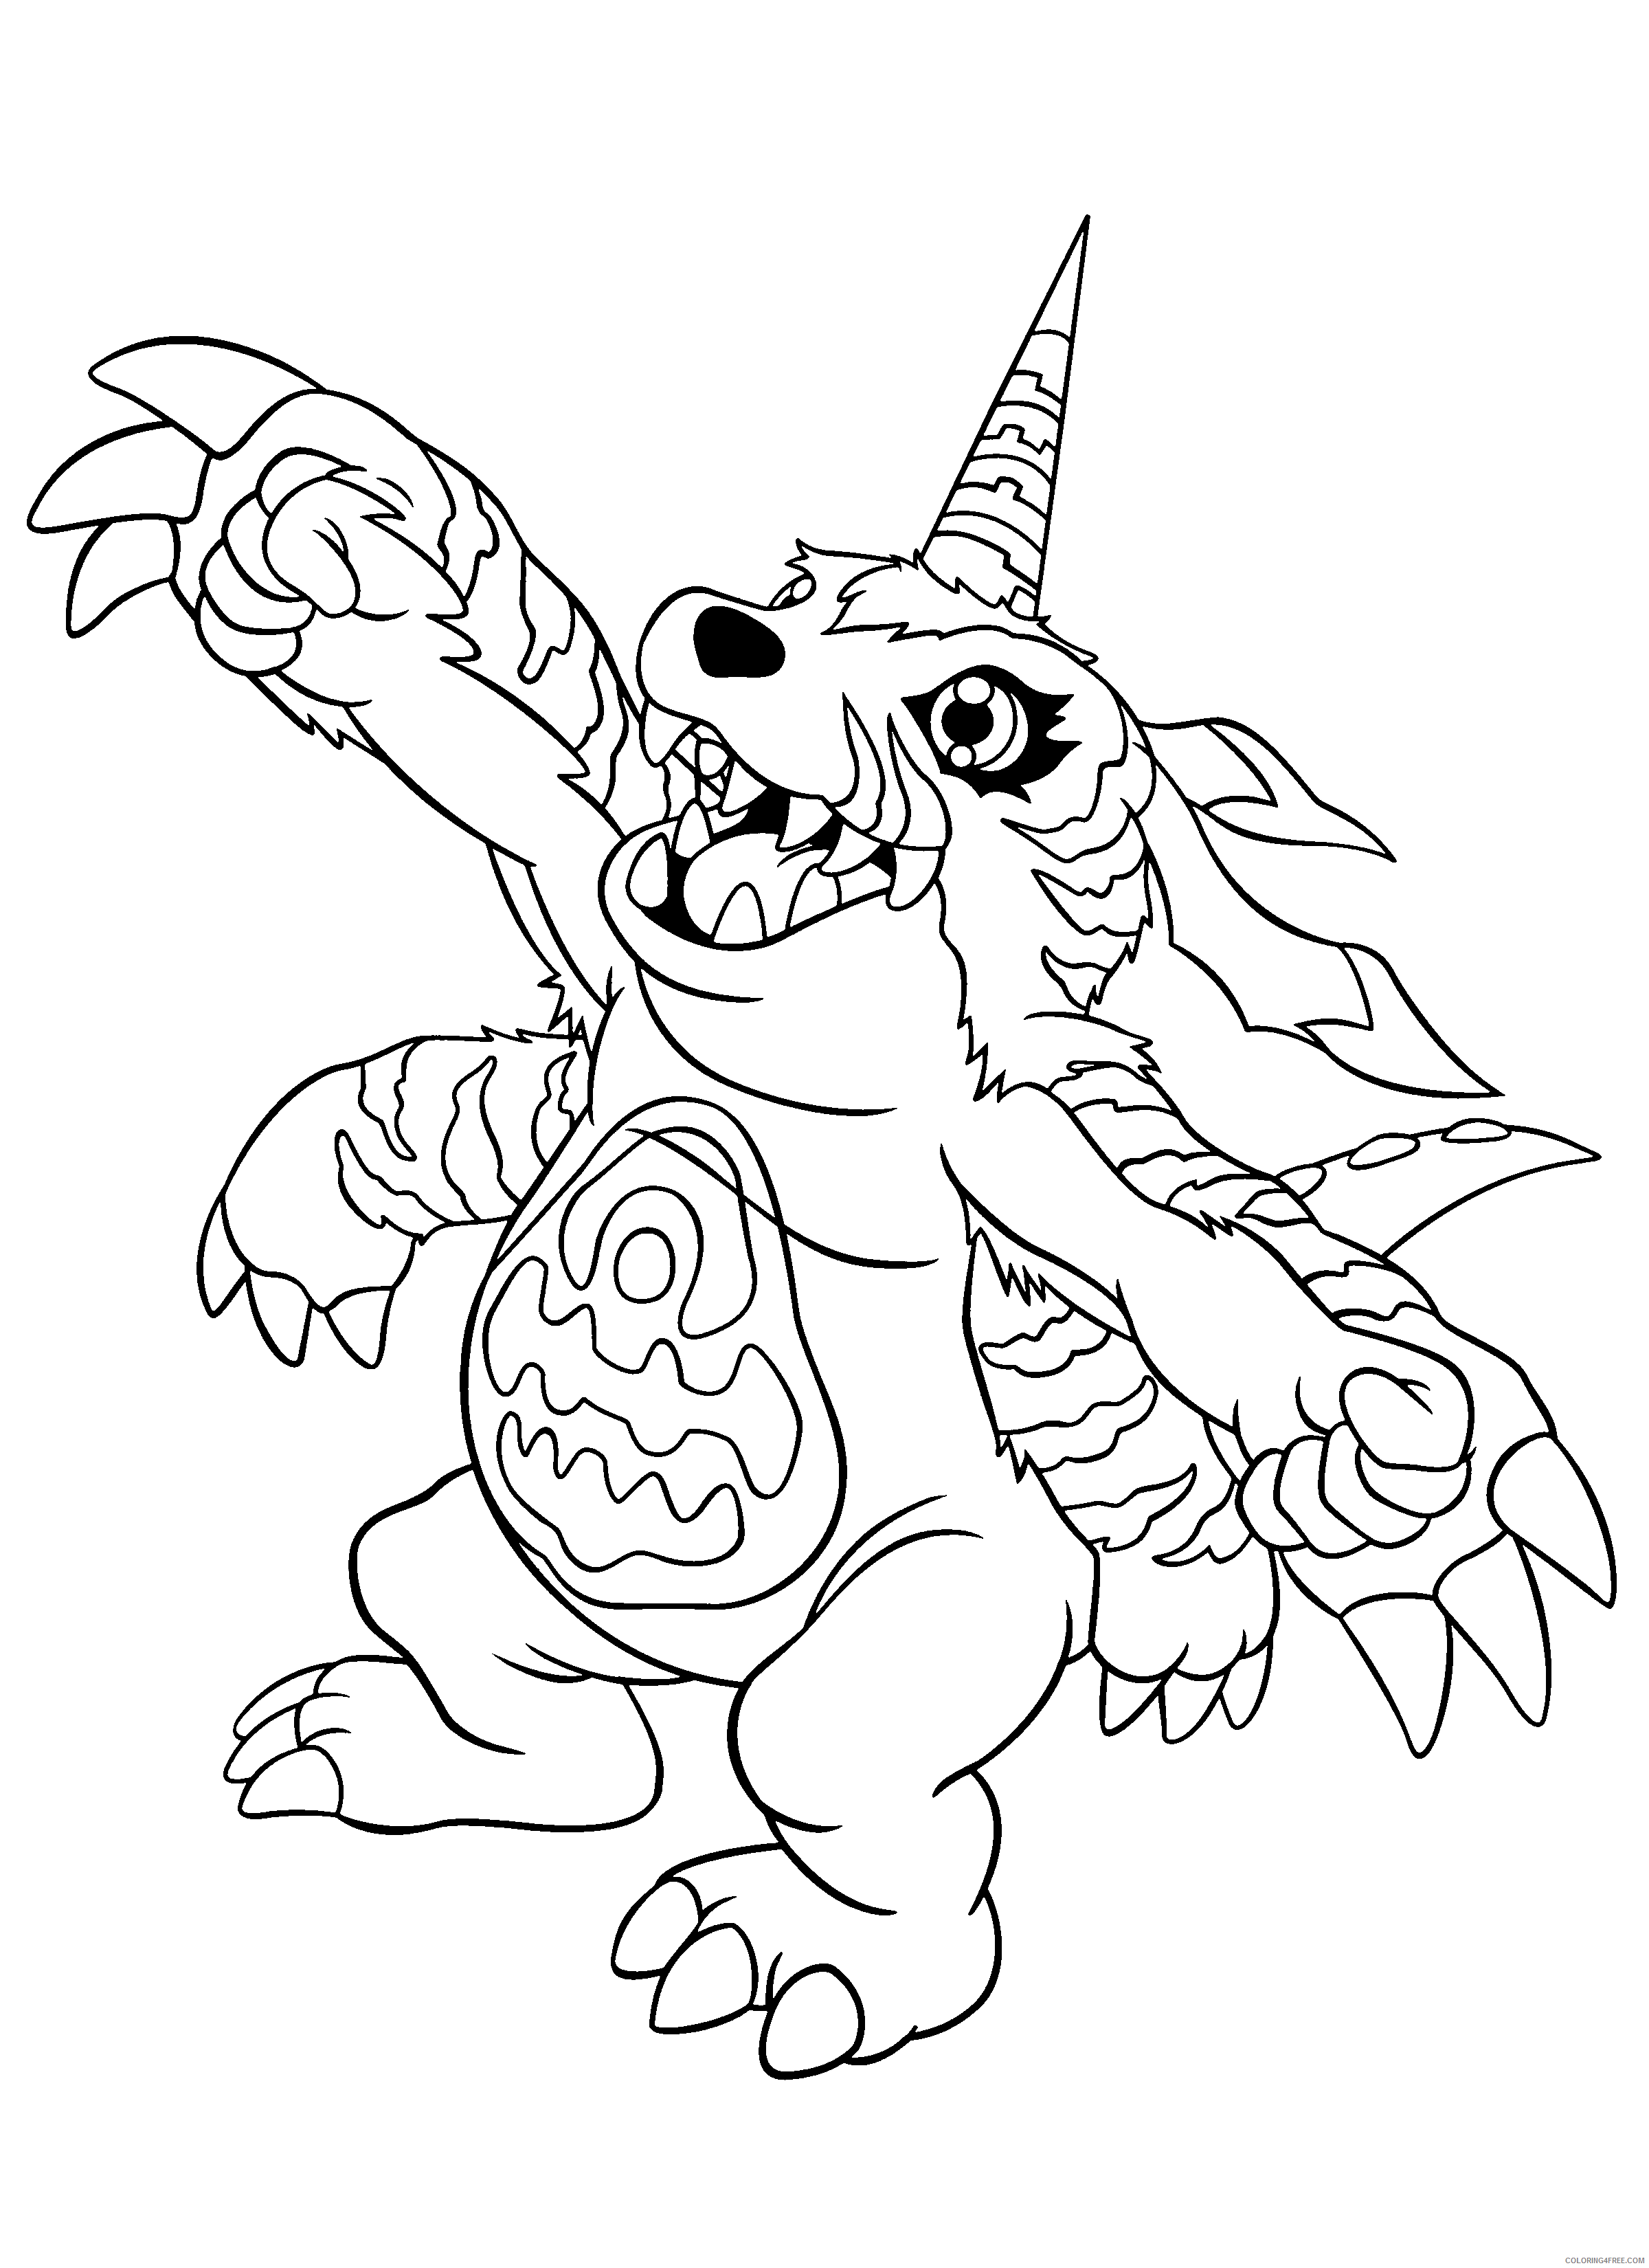 Digimon Printable Coloring Pages Anime digimon 215 2021 0298 Coloring4free